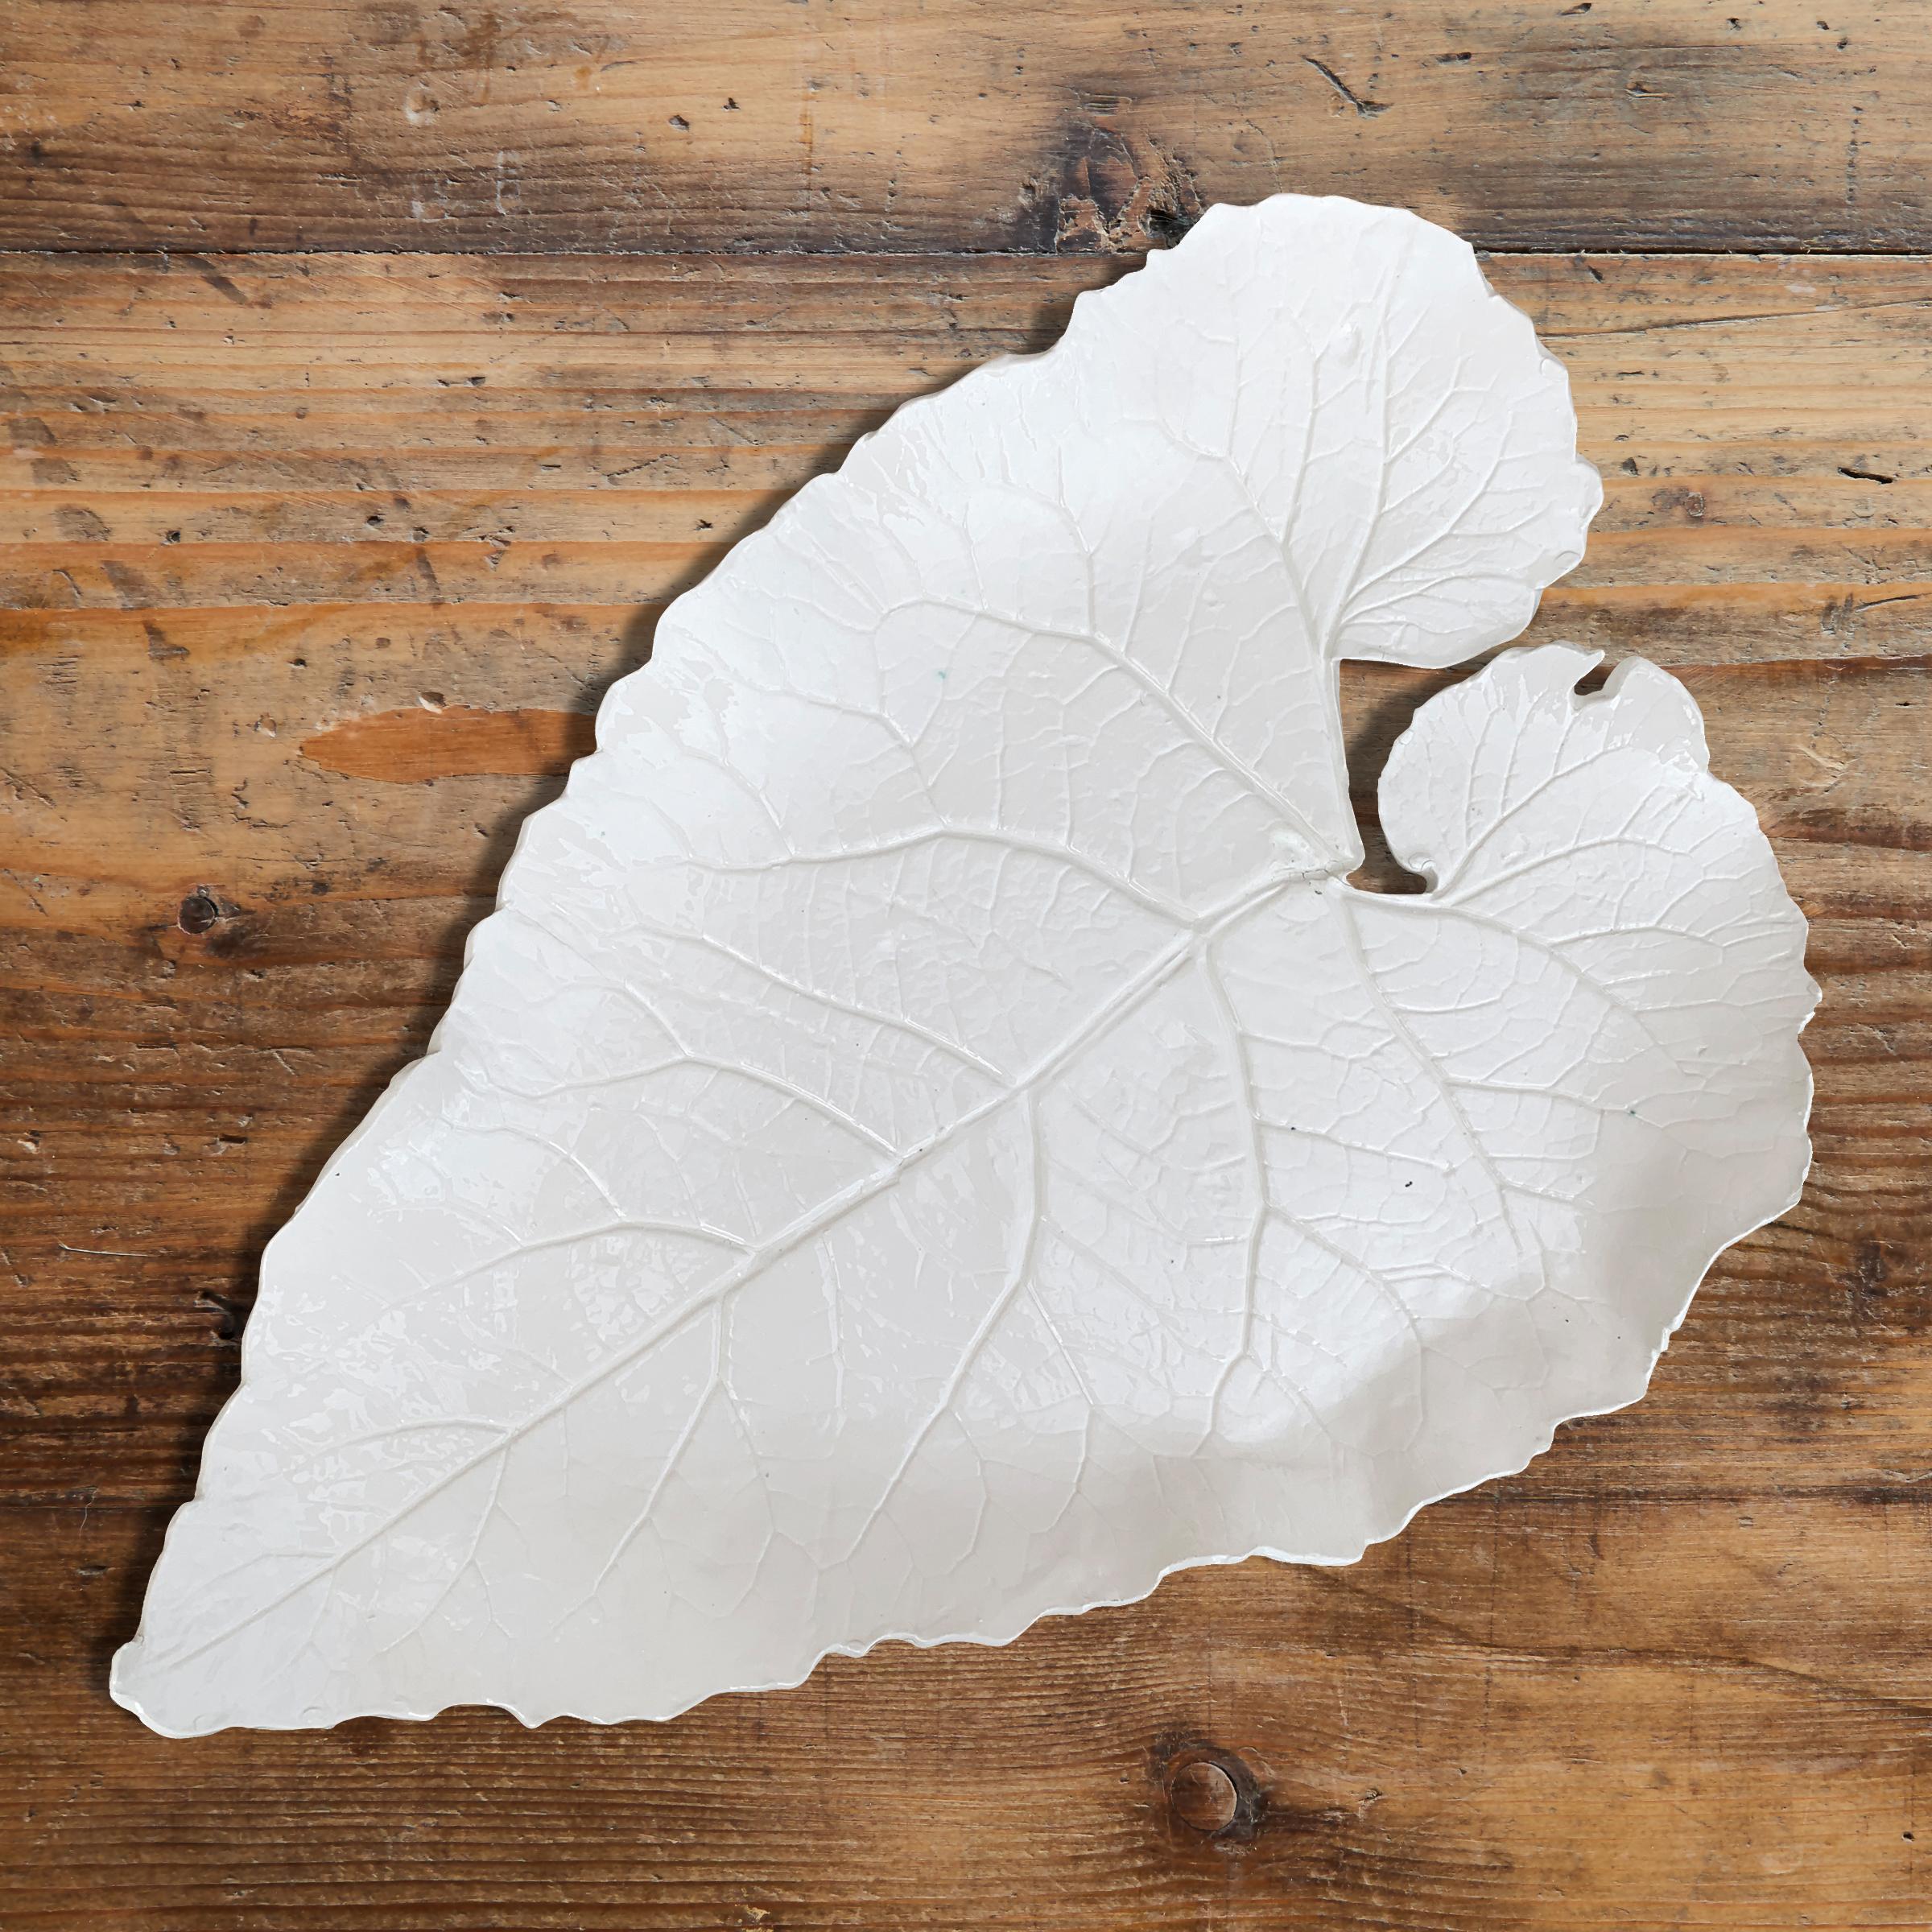 A large studio-made porcelain leaf platter cast from a real leaf, and finished with a clear glaze. Marked in green with the initials of the artist on the back side.